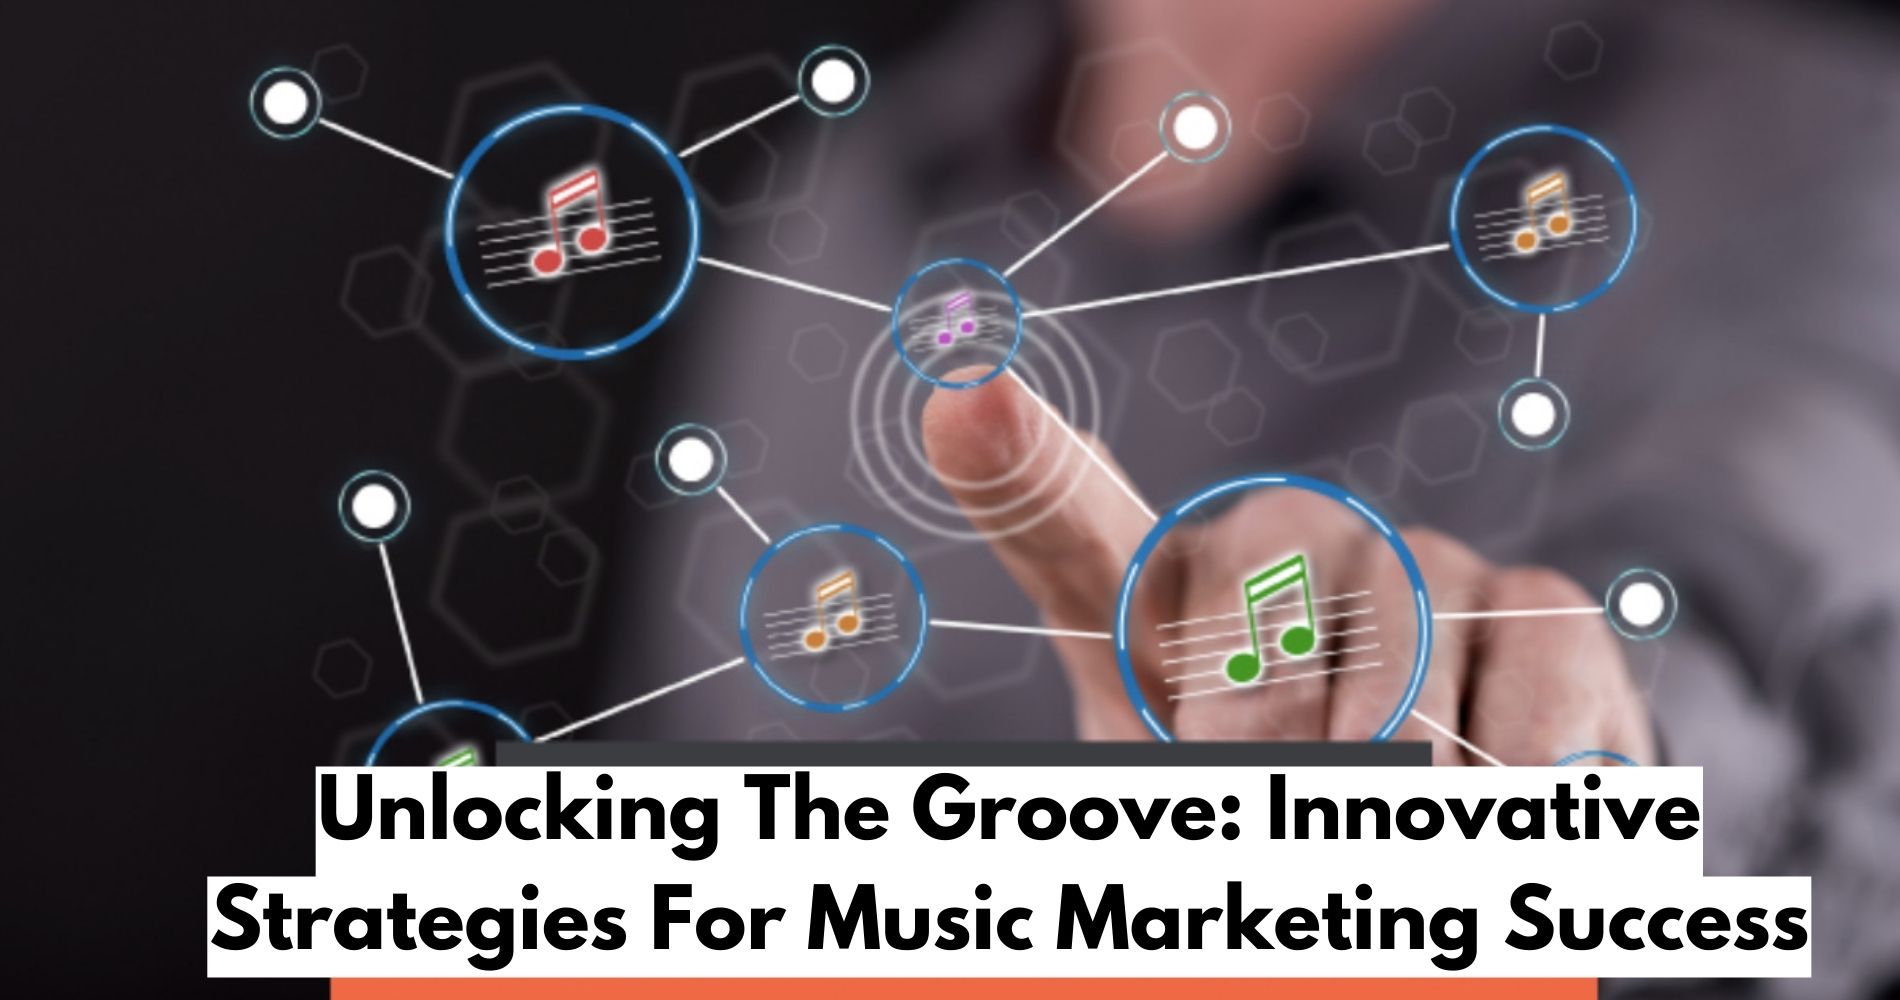 Unlocking The Groove: Innovative Strategies For Music Marketing Success